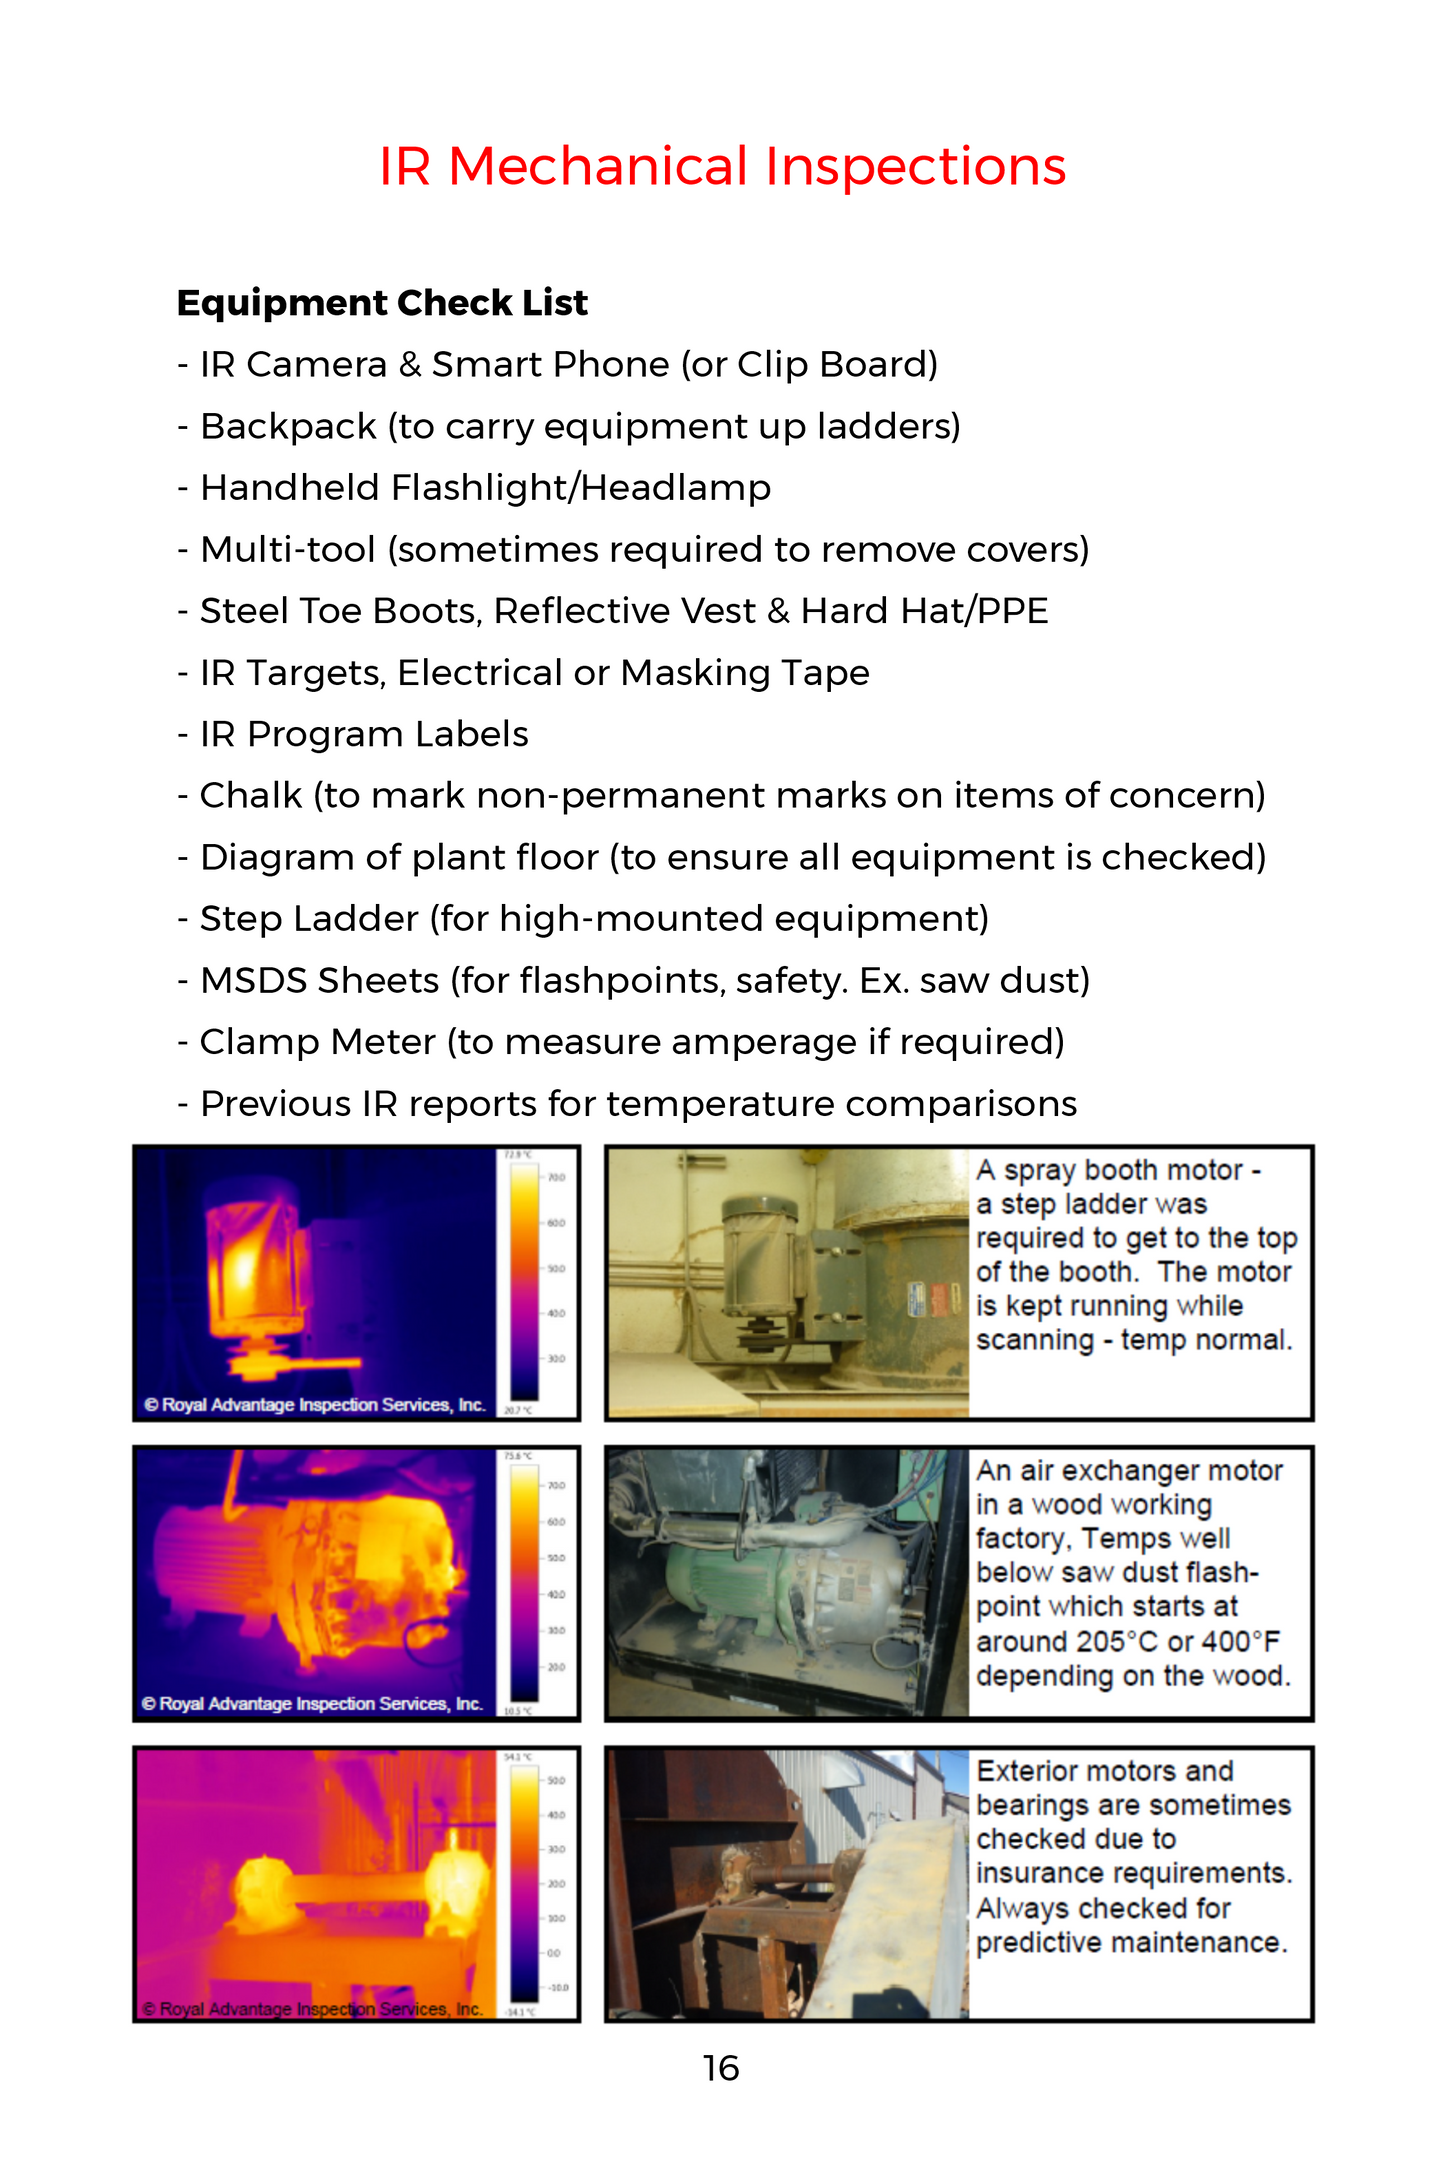 Thermal Imaging Field Reference - The Infrared (IR) Camera Companion